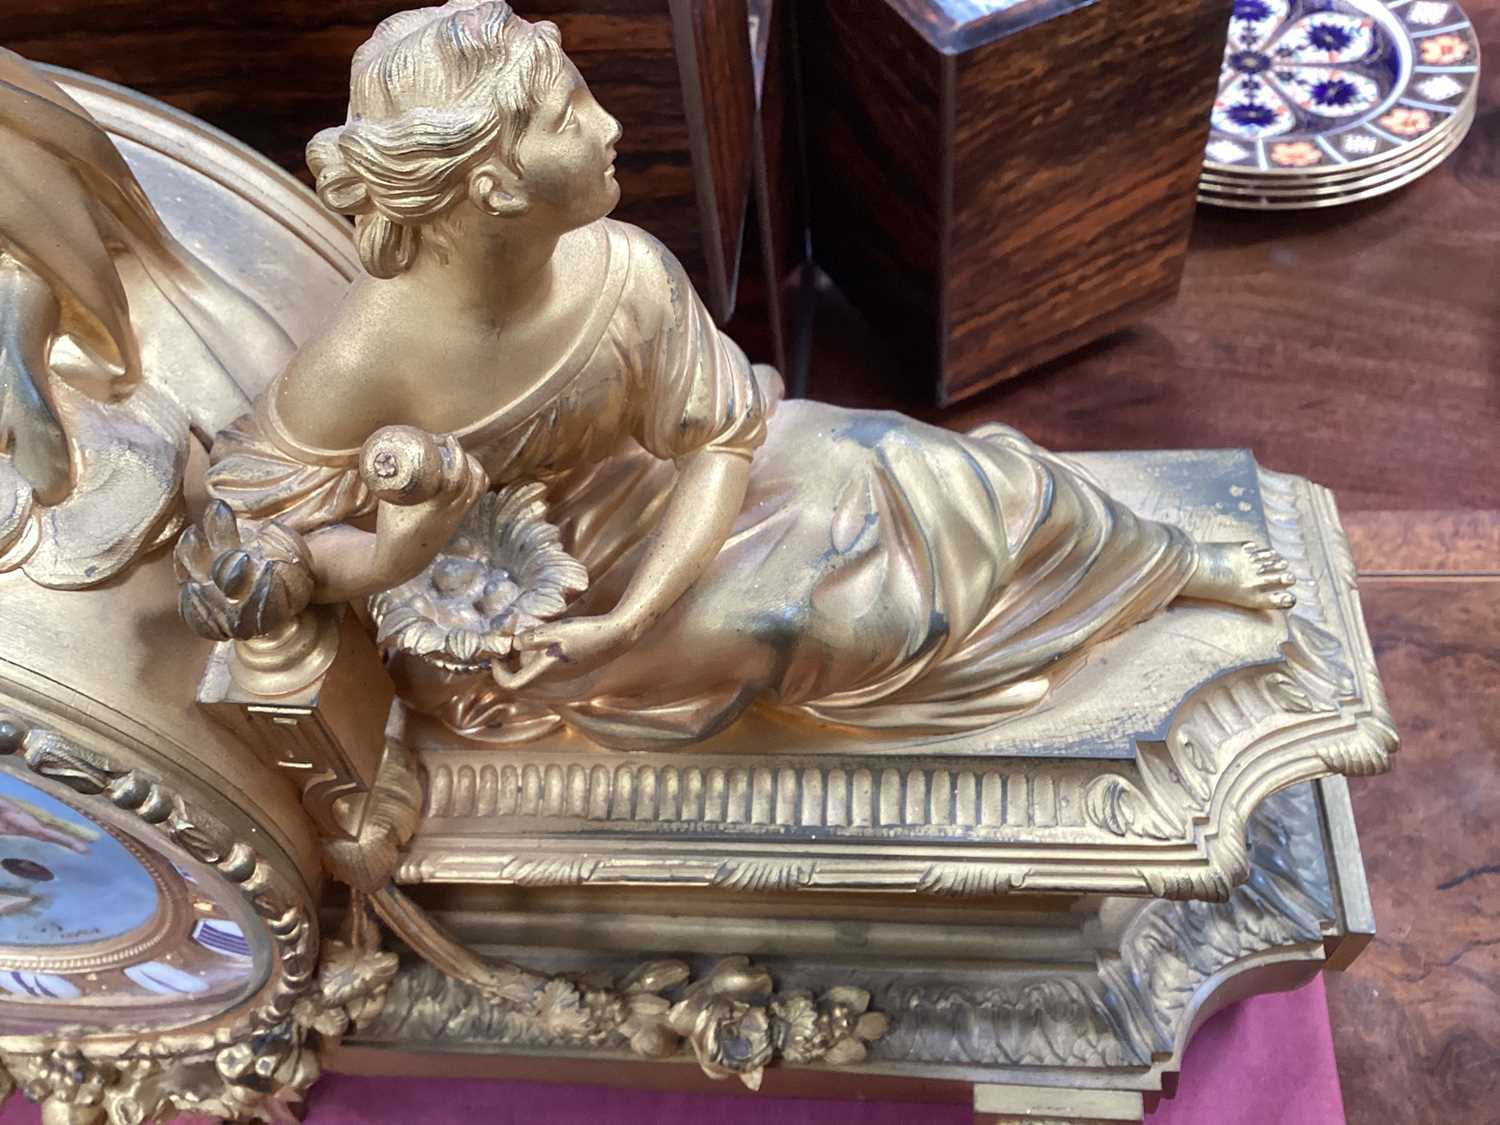 Fine quality large 19th century French ormolu clock garniture by Lerolle à Paris with Sèvres porcela - Image 3 of 26